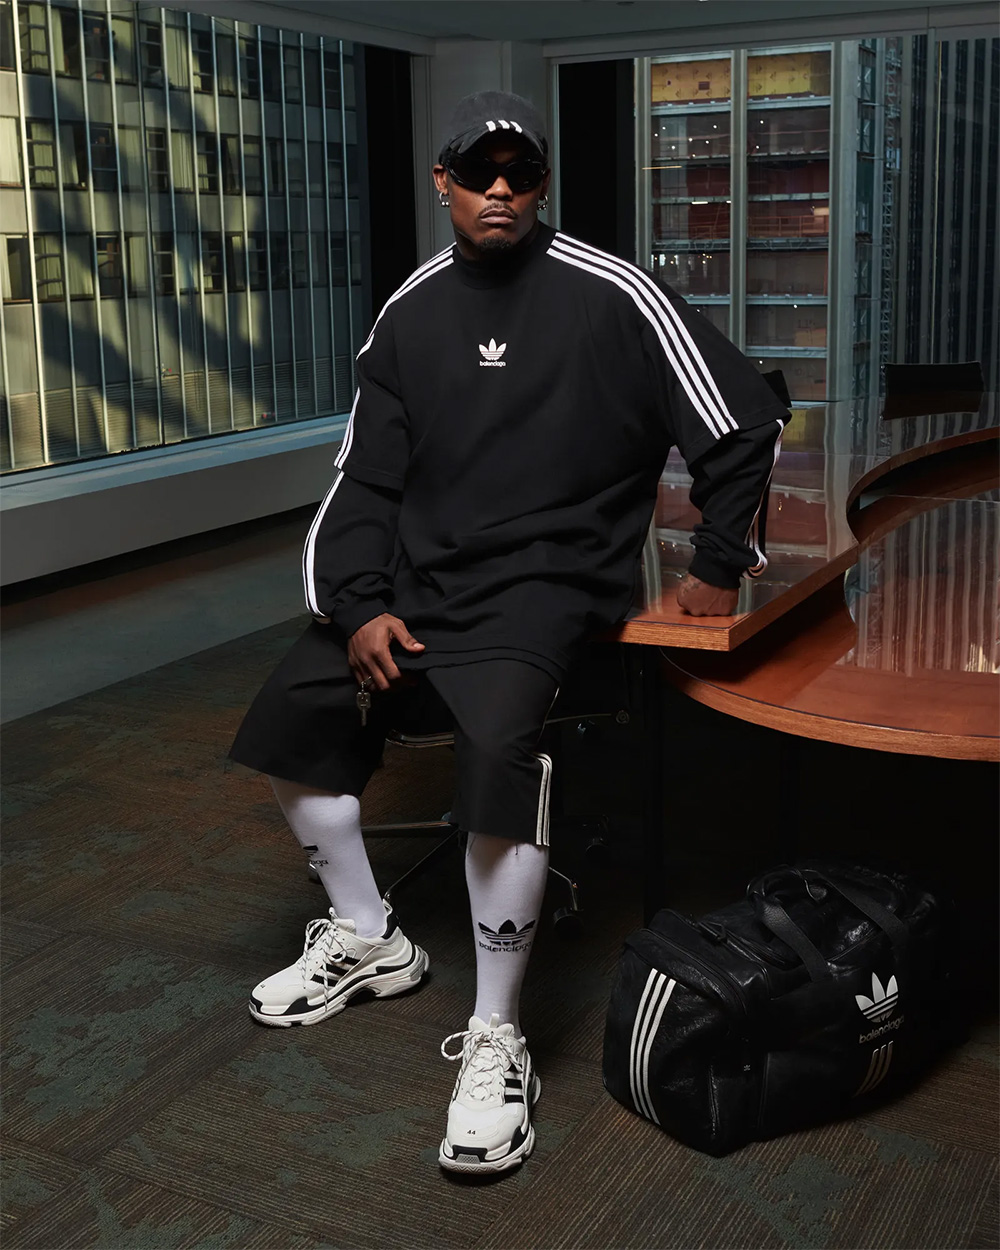 100 Years Of Adidas: The Making Of A Sports & Fashion Icon